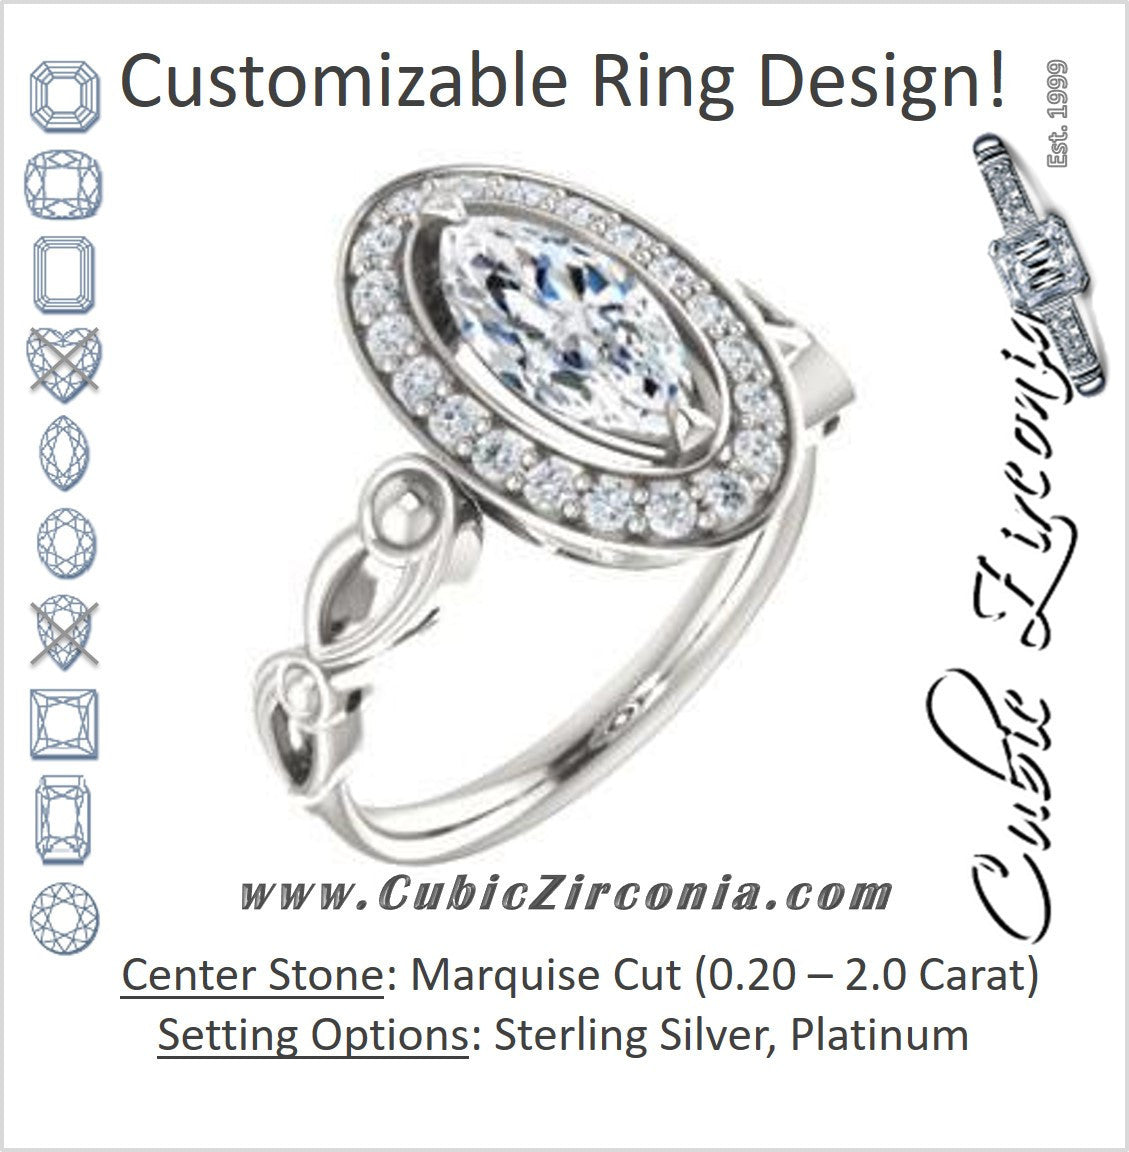 Cubic Zirconia Engagement Ring- The Deb (Customizable Marquise Cut Design with Large Halo, Fleur-de-lis Trellis and Bubbled Infinity Band)